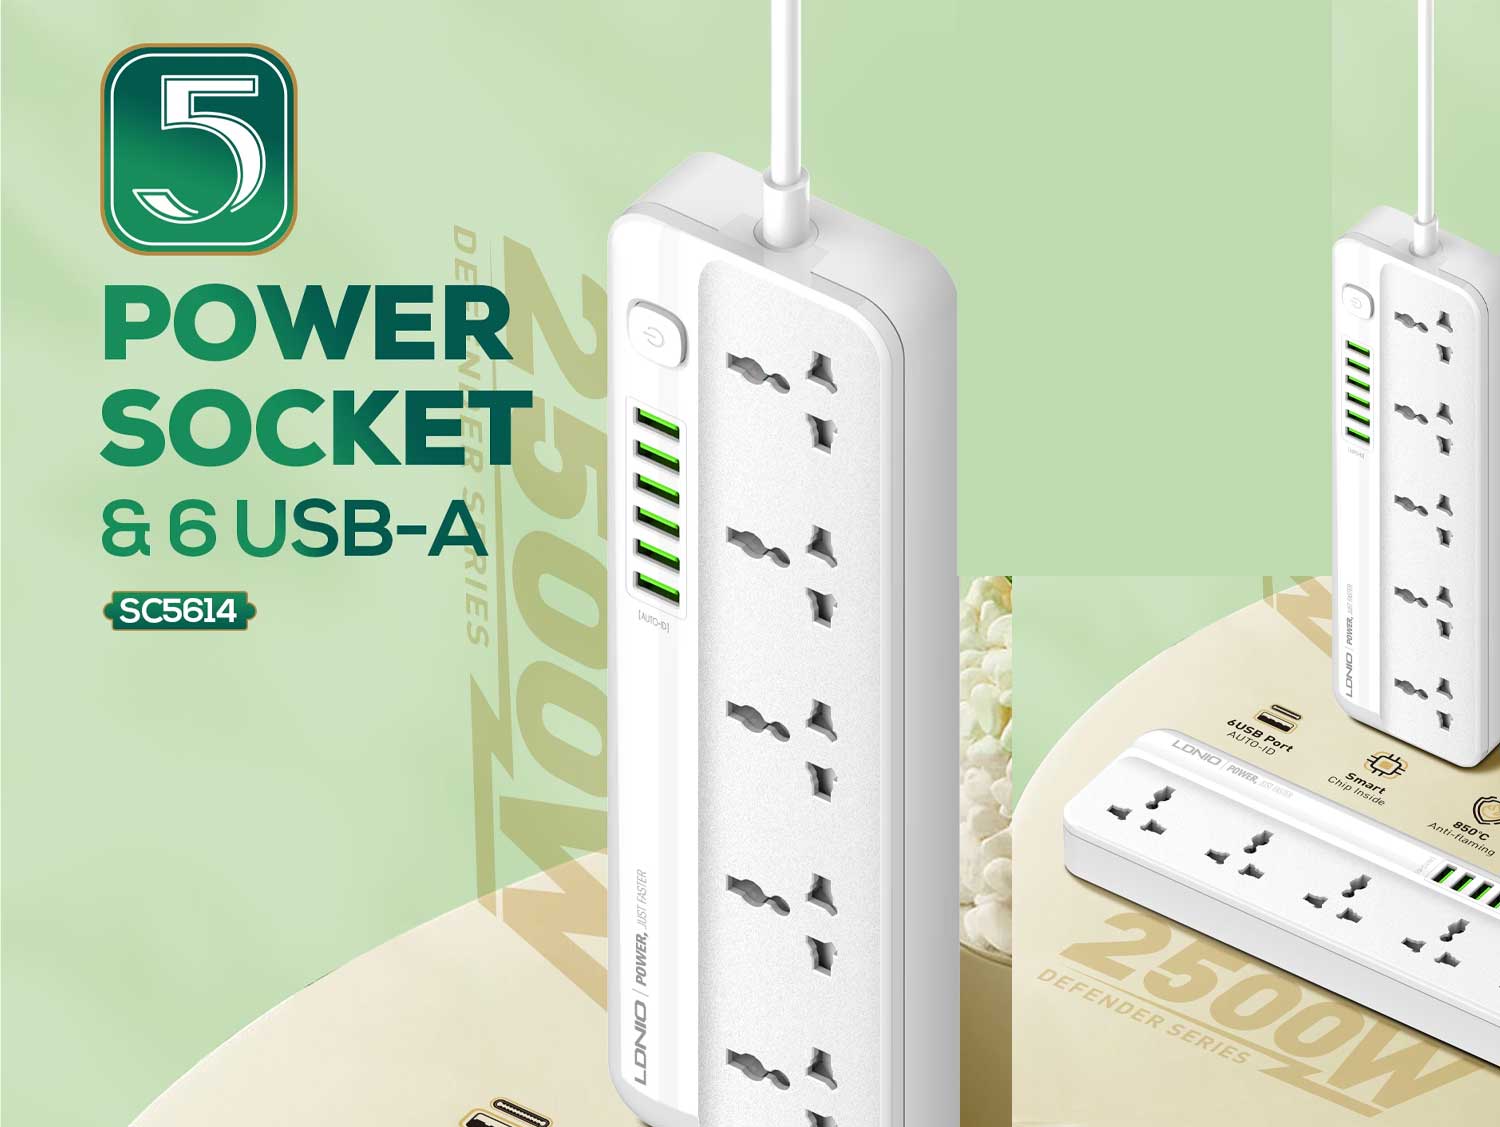 LDNIO SC5614 Power Strip Surge Protector with 5 AC Outlets + 6 USB Extension Power Cord